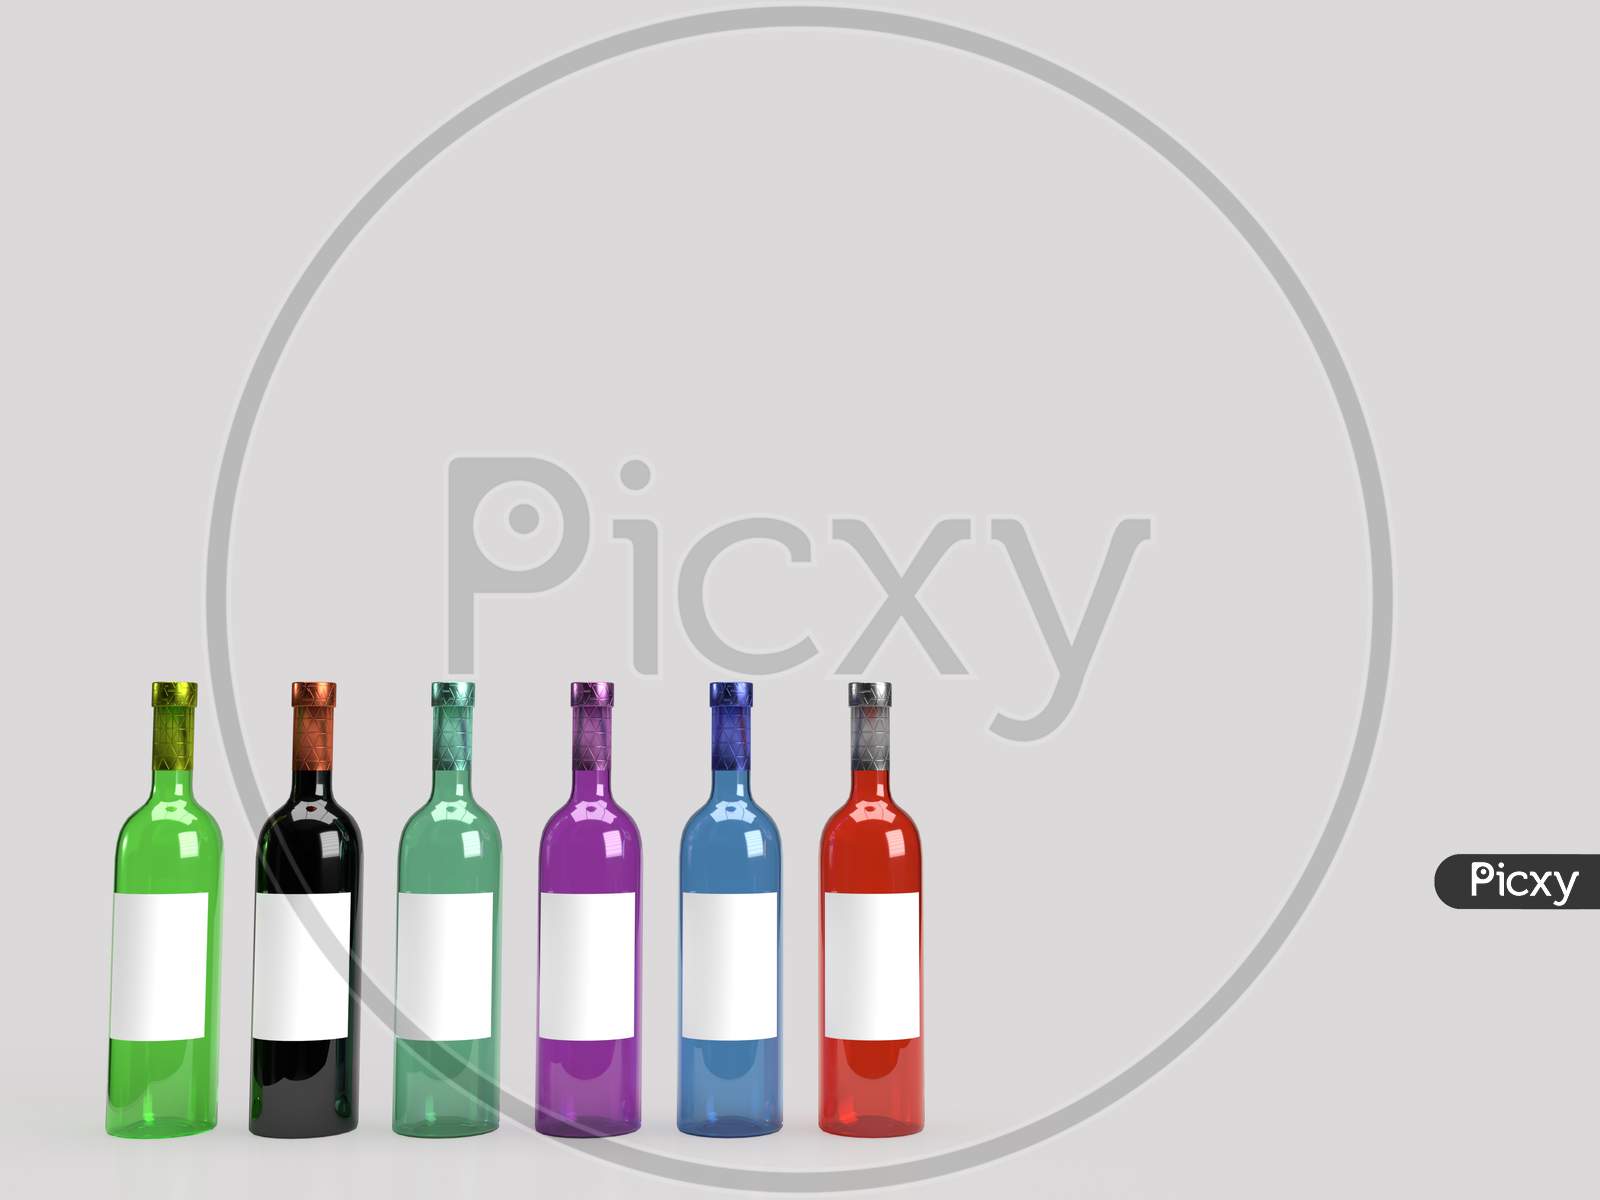 3D Render Of Different Colored Foil Sealed Glass Wine Bottle In Solid Light Grey Background With White Blank Label For Product Mockup.